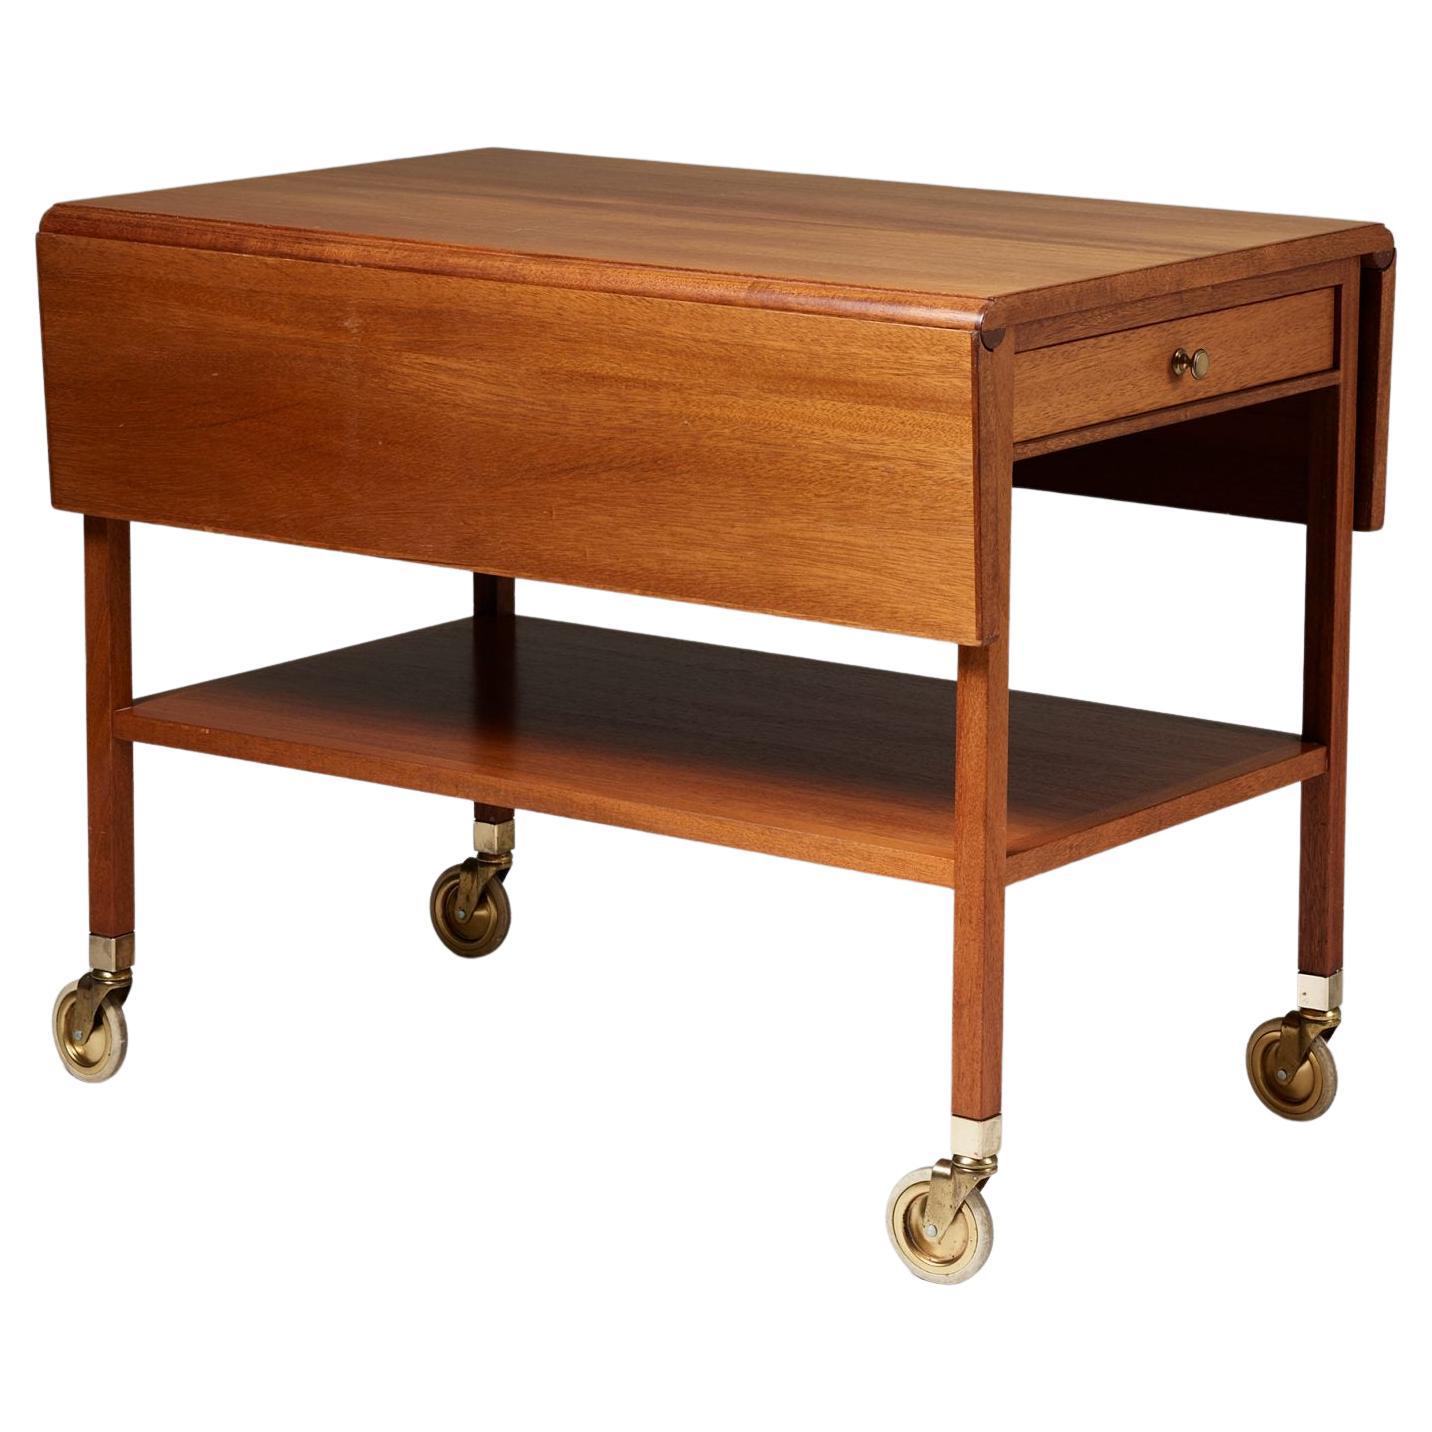 Serving trolley model 756 designed by Josef Frank for Svenskt Tenn, 
Sweden, 1940s.

Veneered walnut and brass.

H: 65 cm
W: 53 cm
Width when fully extended: 89 cm
D: 80 cm

Josef Frank was a true European, he was also a pioneer of what would become